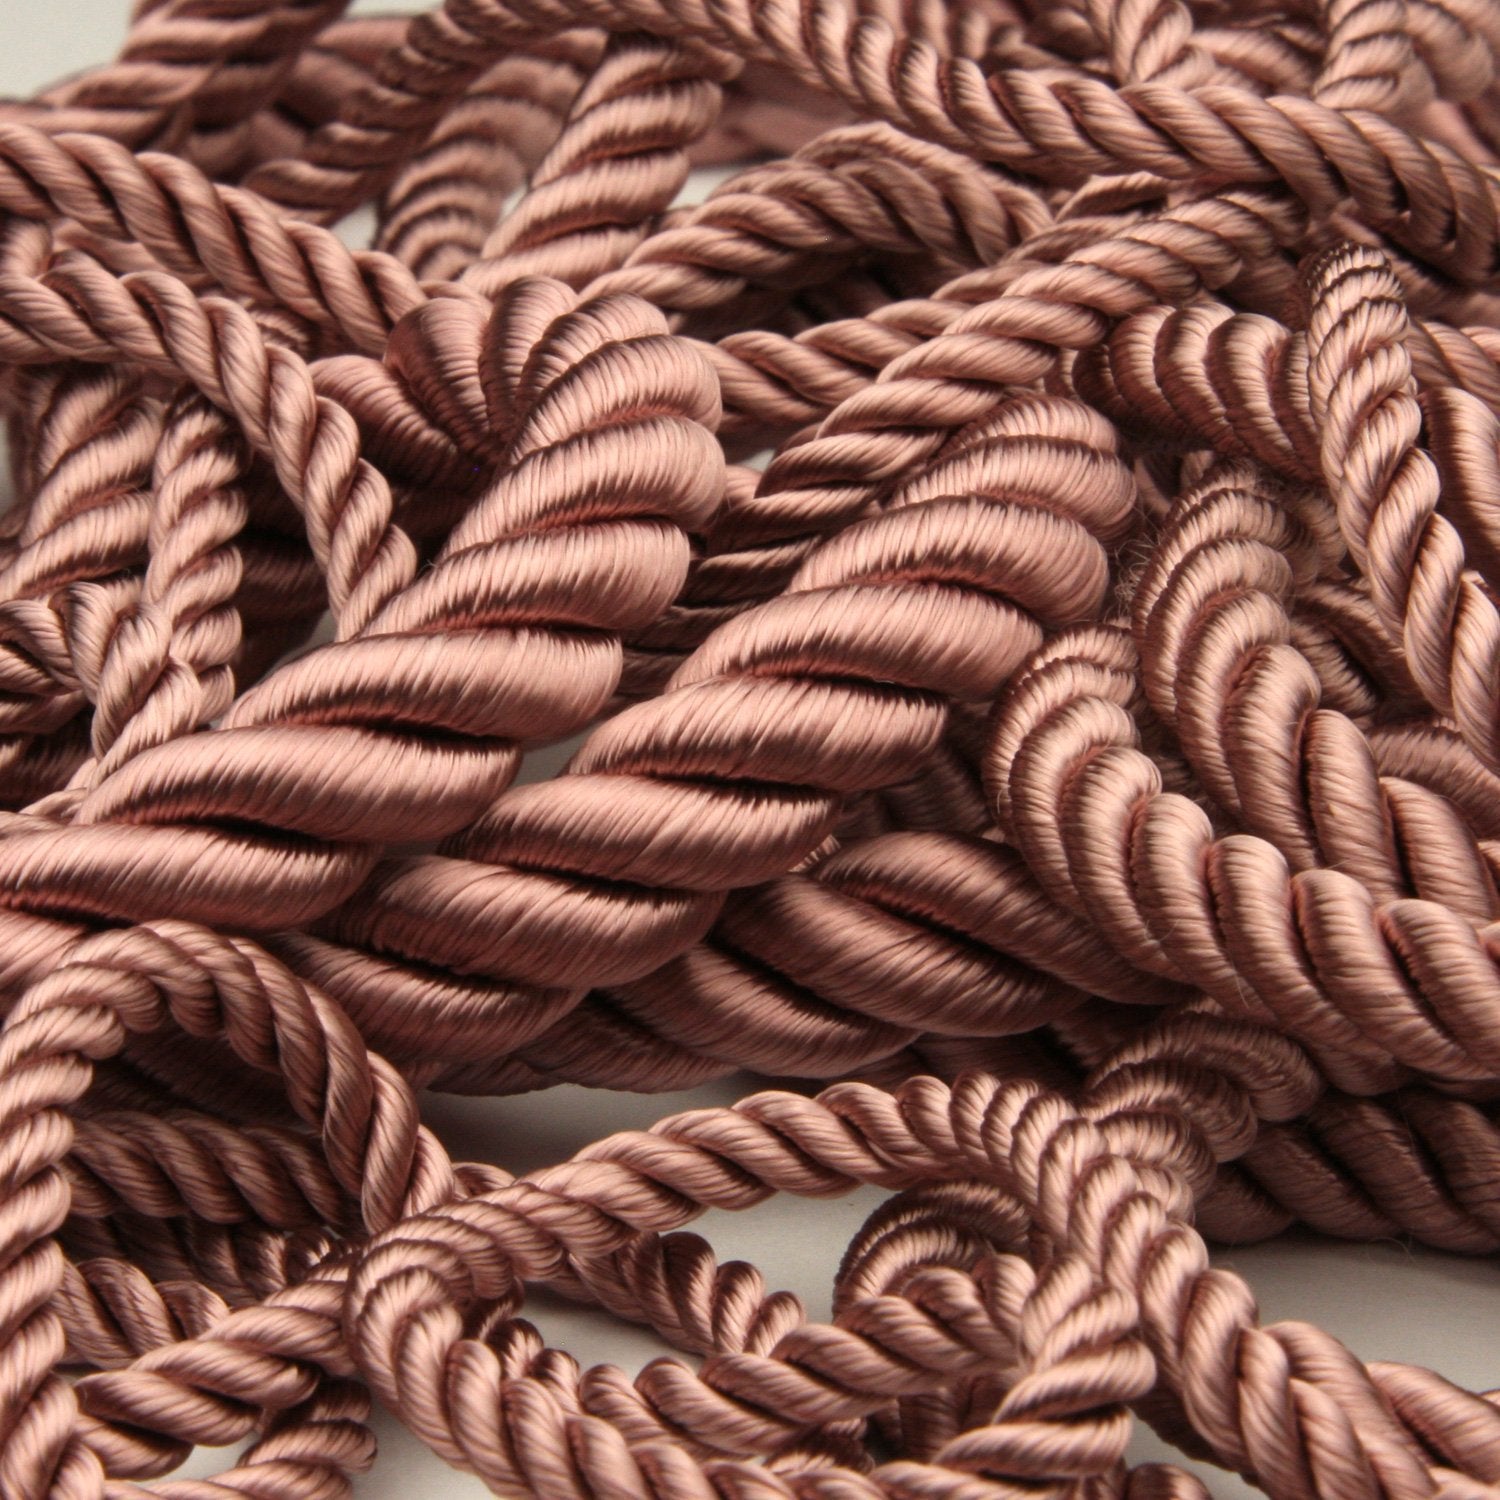 Wholesale] Rayon Twist Cord approx.4mm (5/32) 50 Meters Roll